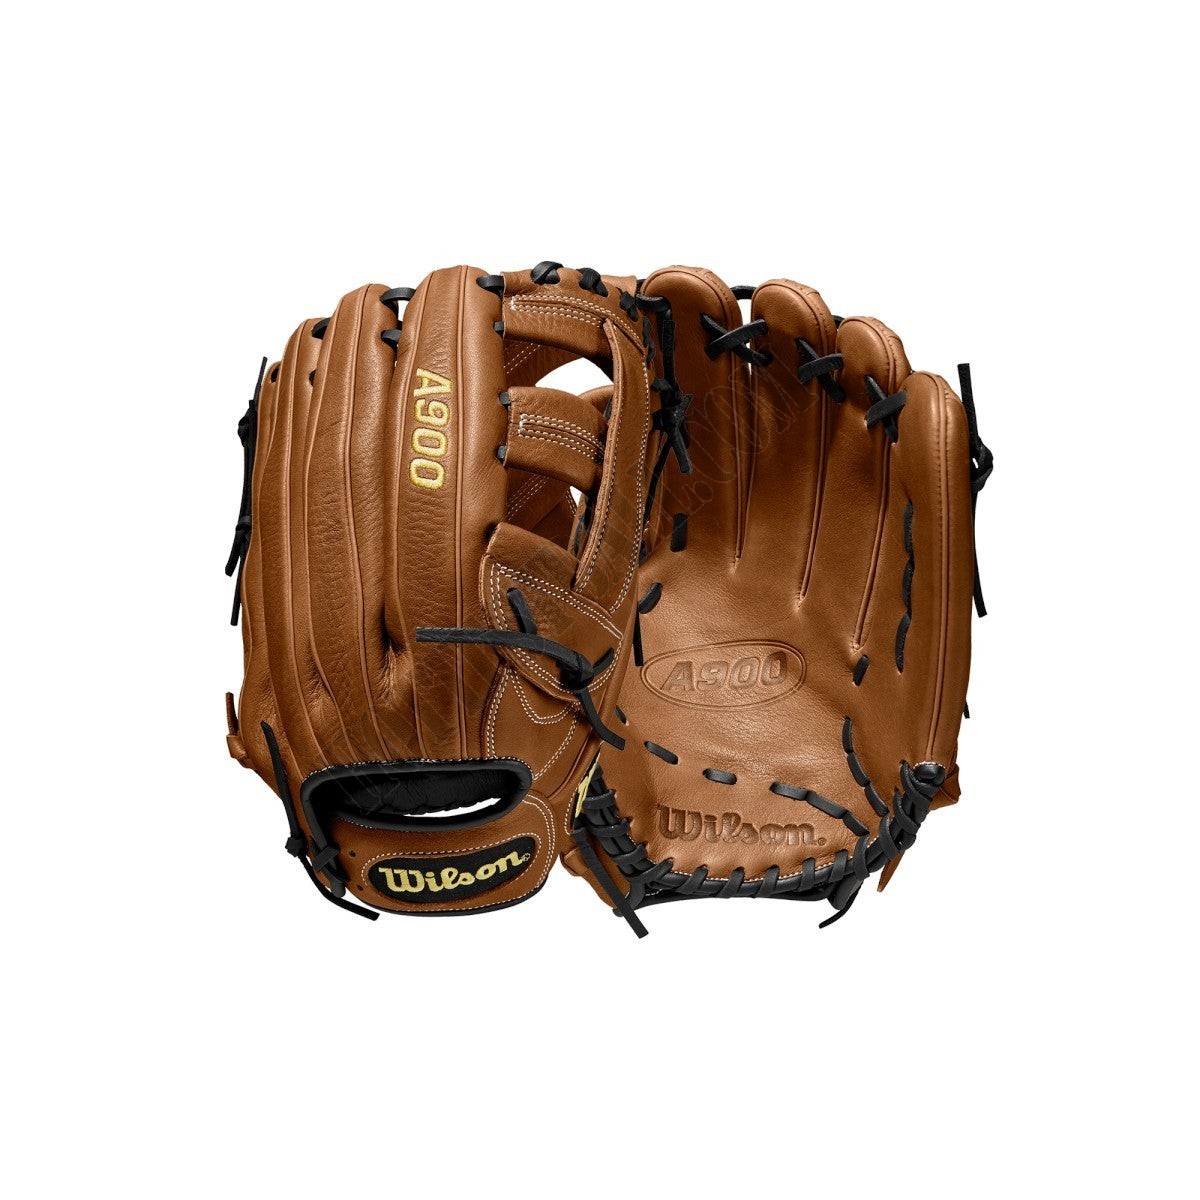 2020 A900 13" Slowpitch Glove ● Wilson Promotions - 2020 A900 13" Slowpitch Glove ● Wilson Promotions